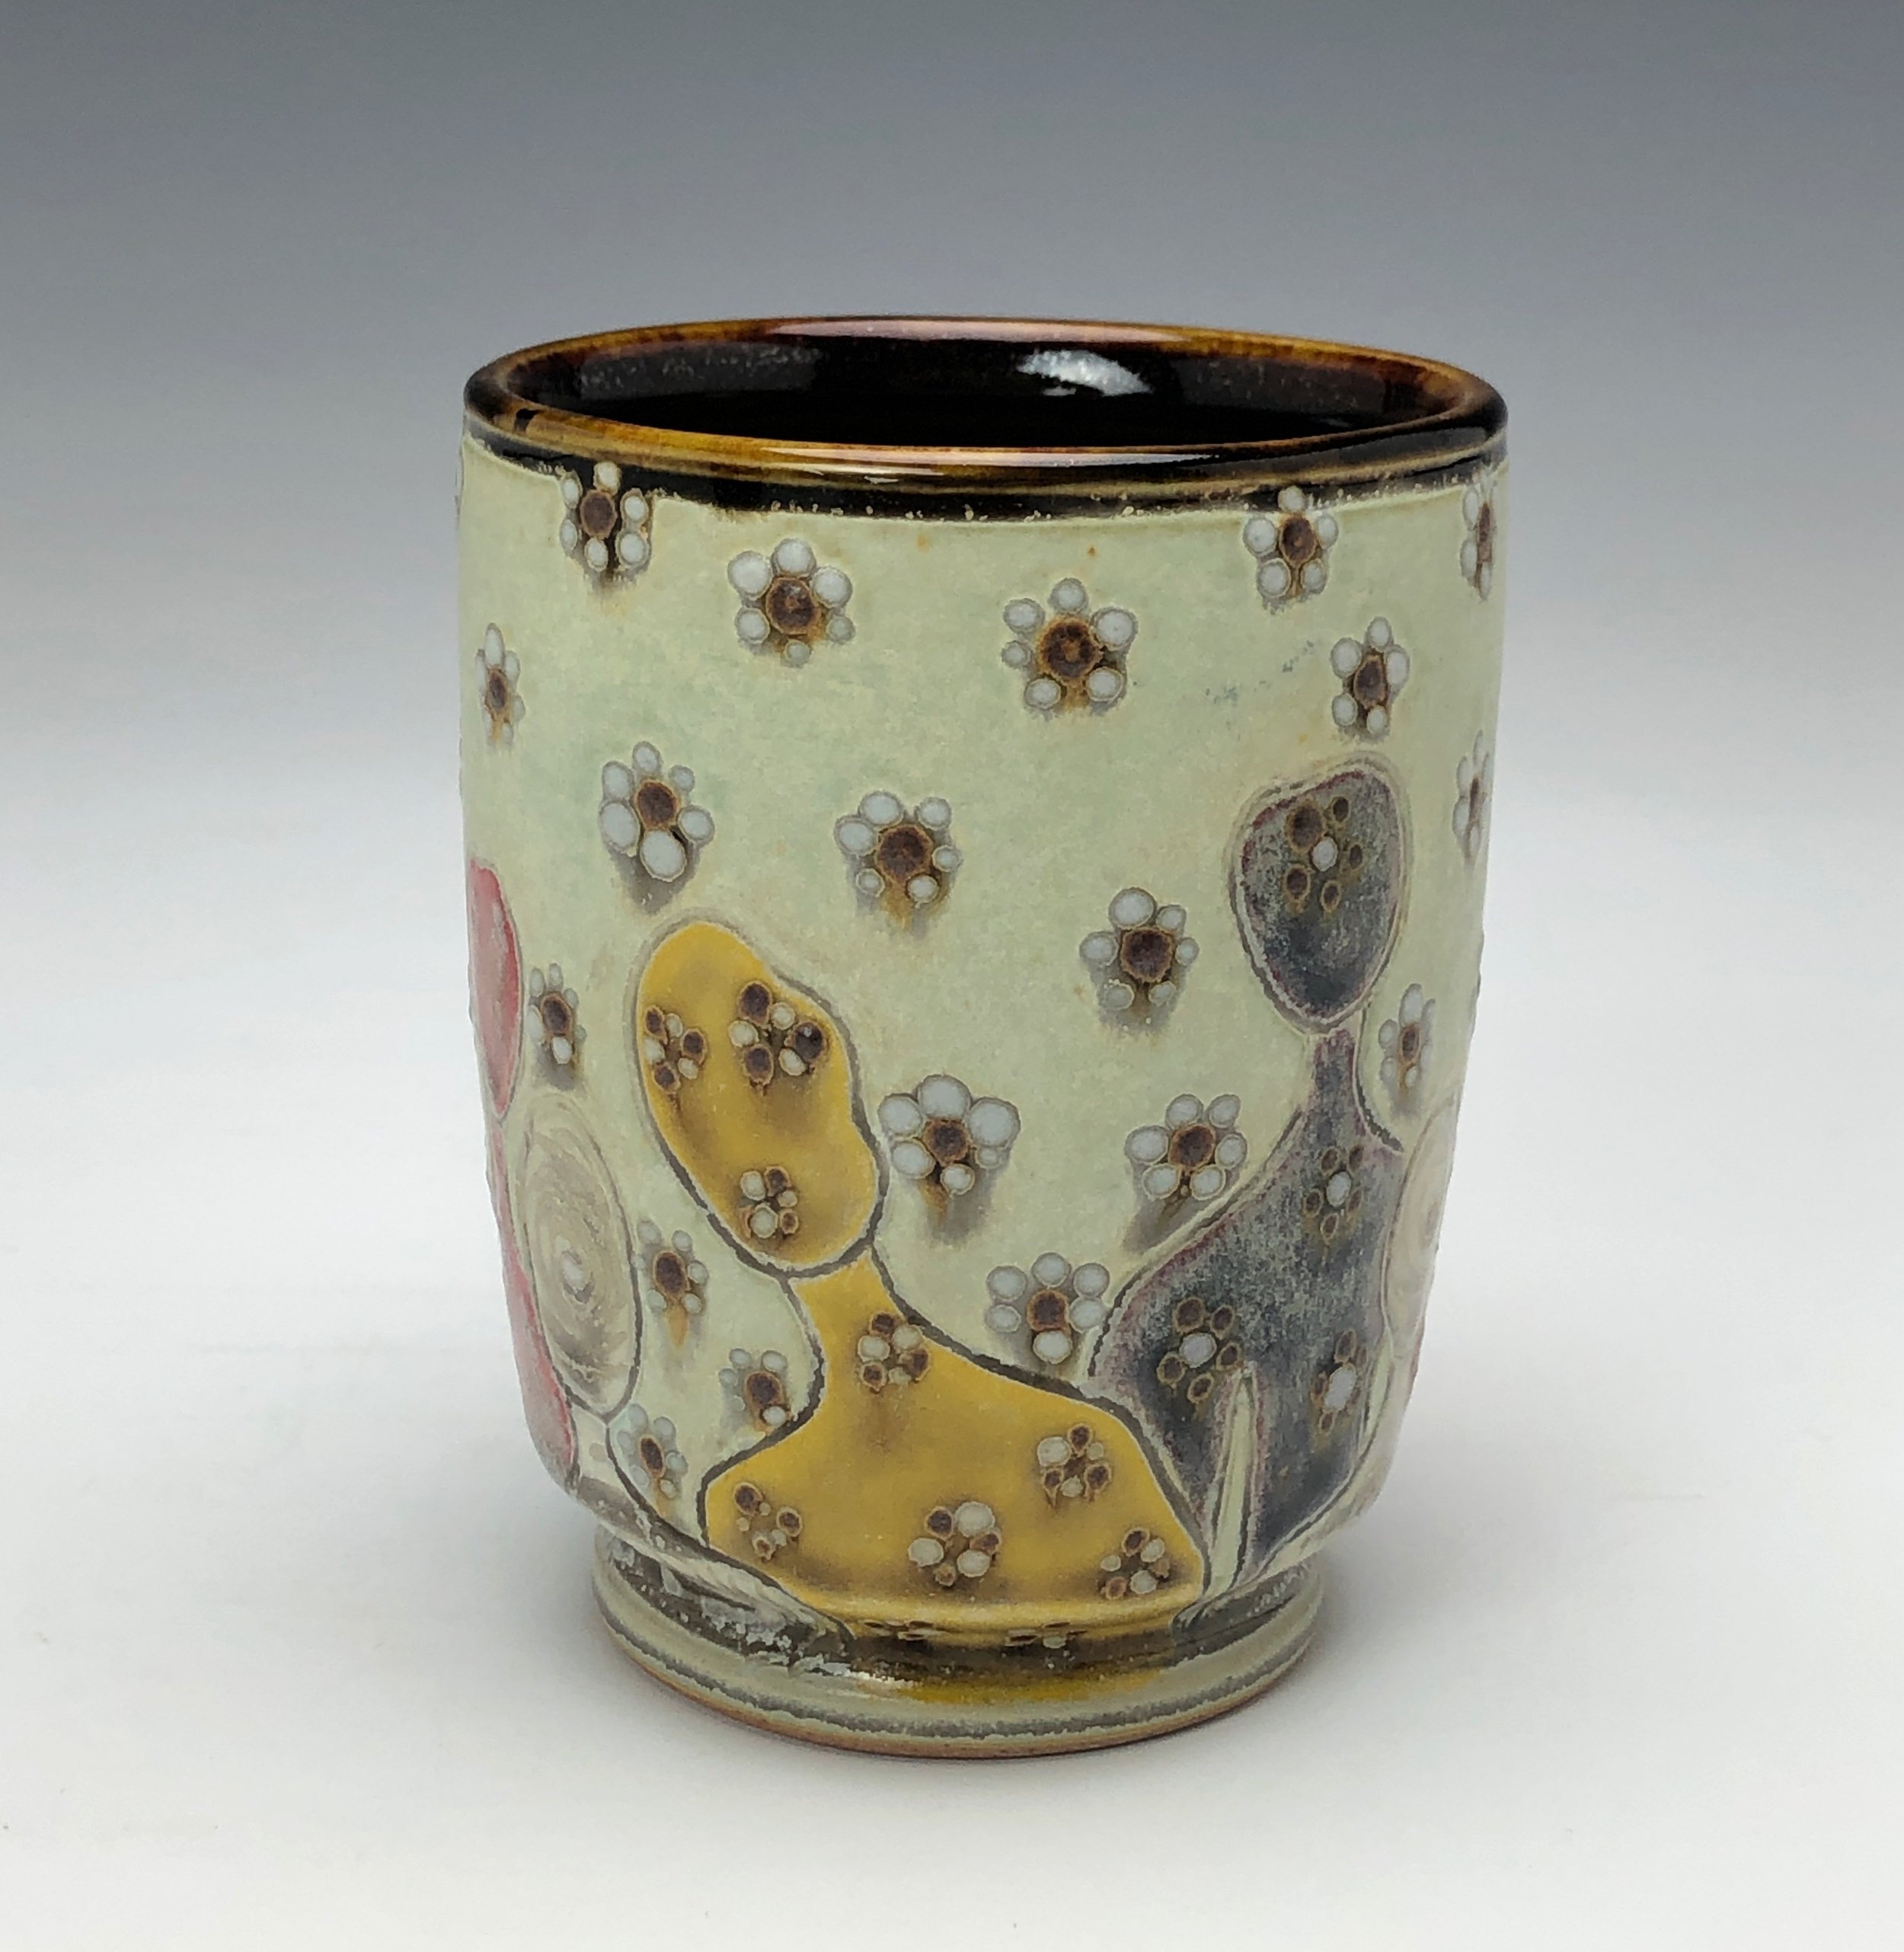  Samantha Henneke, Bulldog Pottery, Seagrove, North Carolina  Yunomi 6- Casual drinking cup made from a smooth white porcelaneous clay body. Figurative decoration with slip and glaze dot patterns. Translucent vellum glaze over various underglaze colo